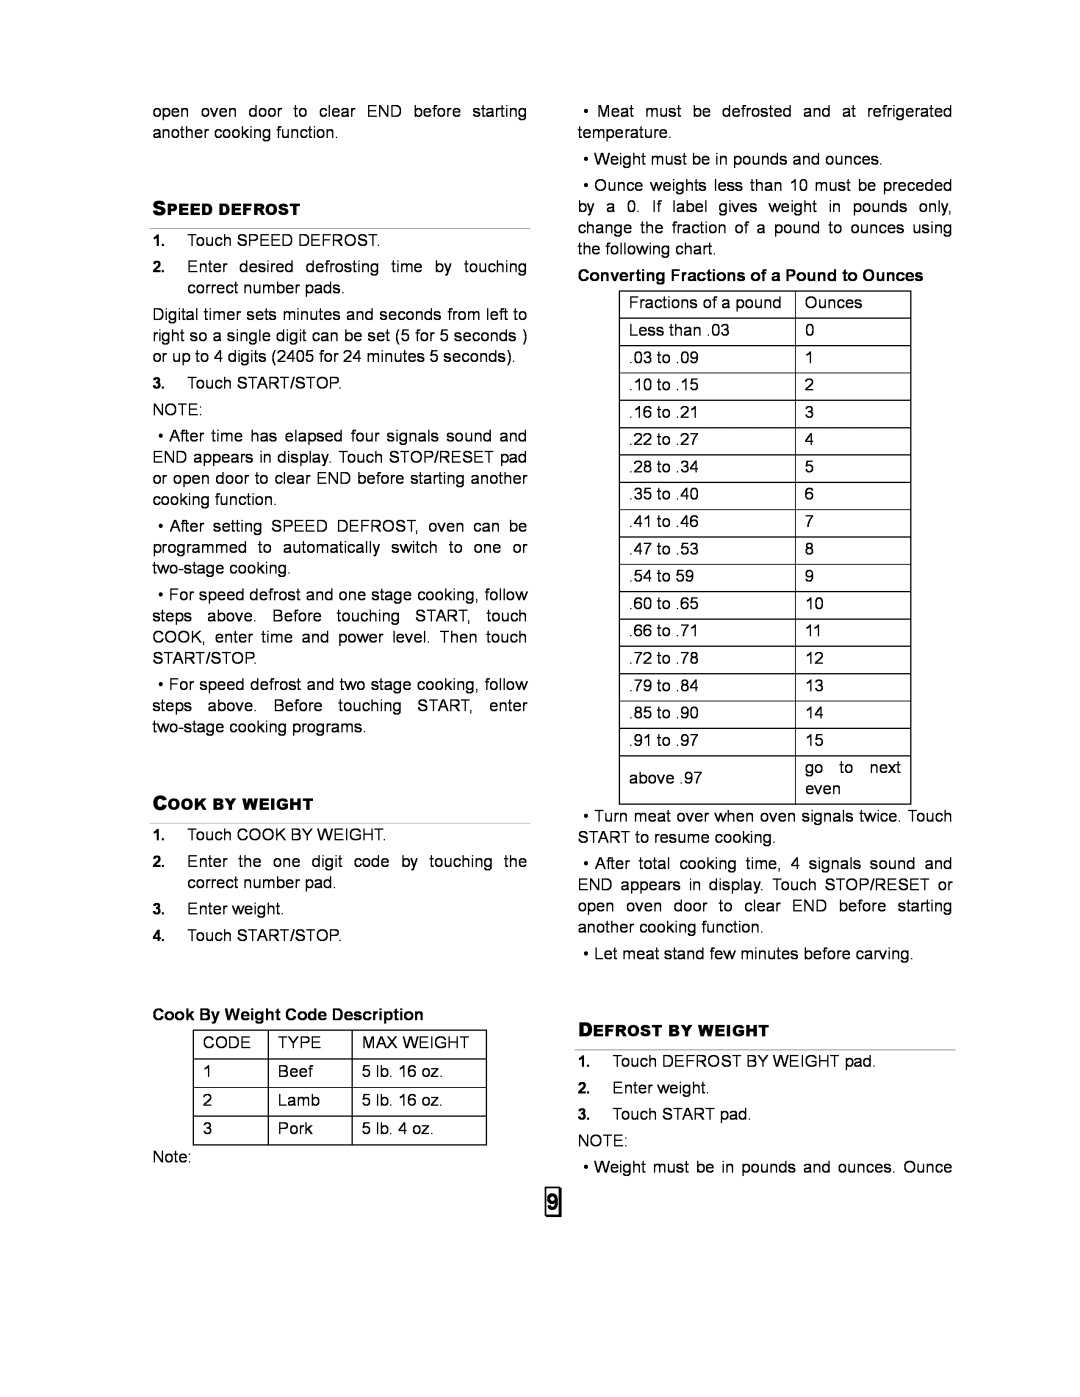 Sears 86030 user manual Cook By Weight Code Description, Converting Fractions of a Pound to Ounces 